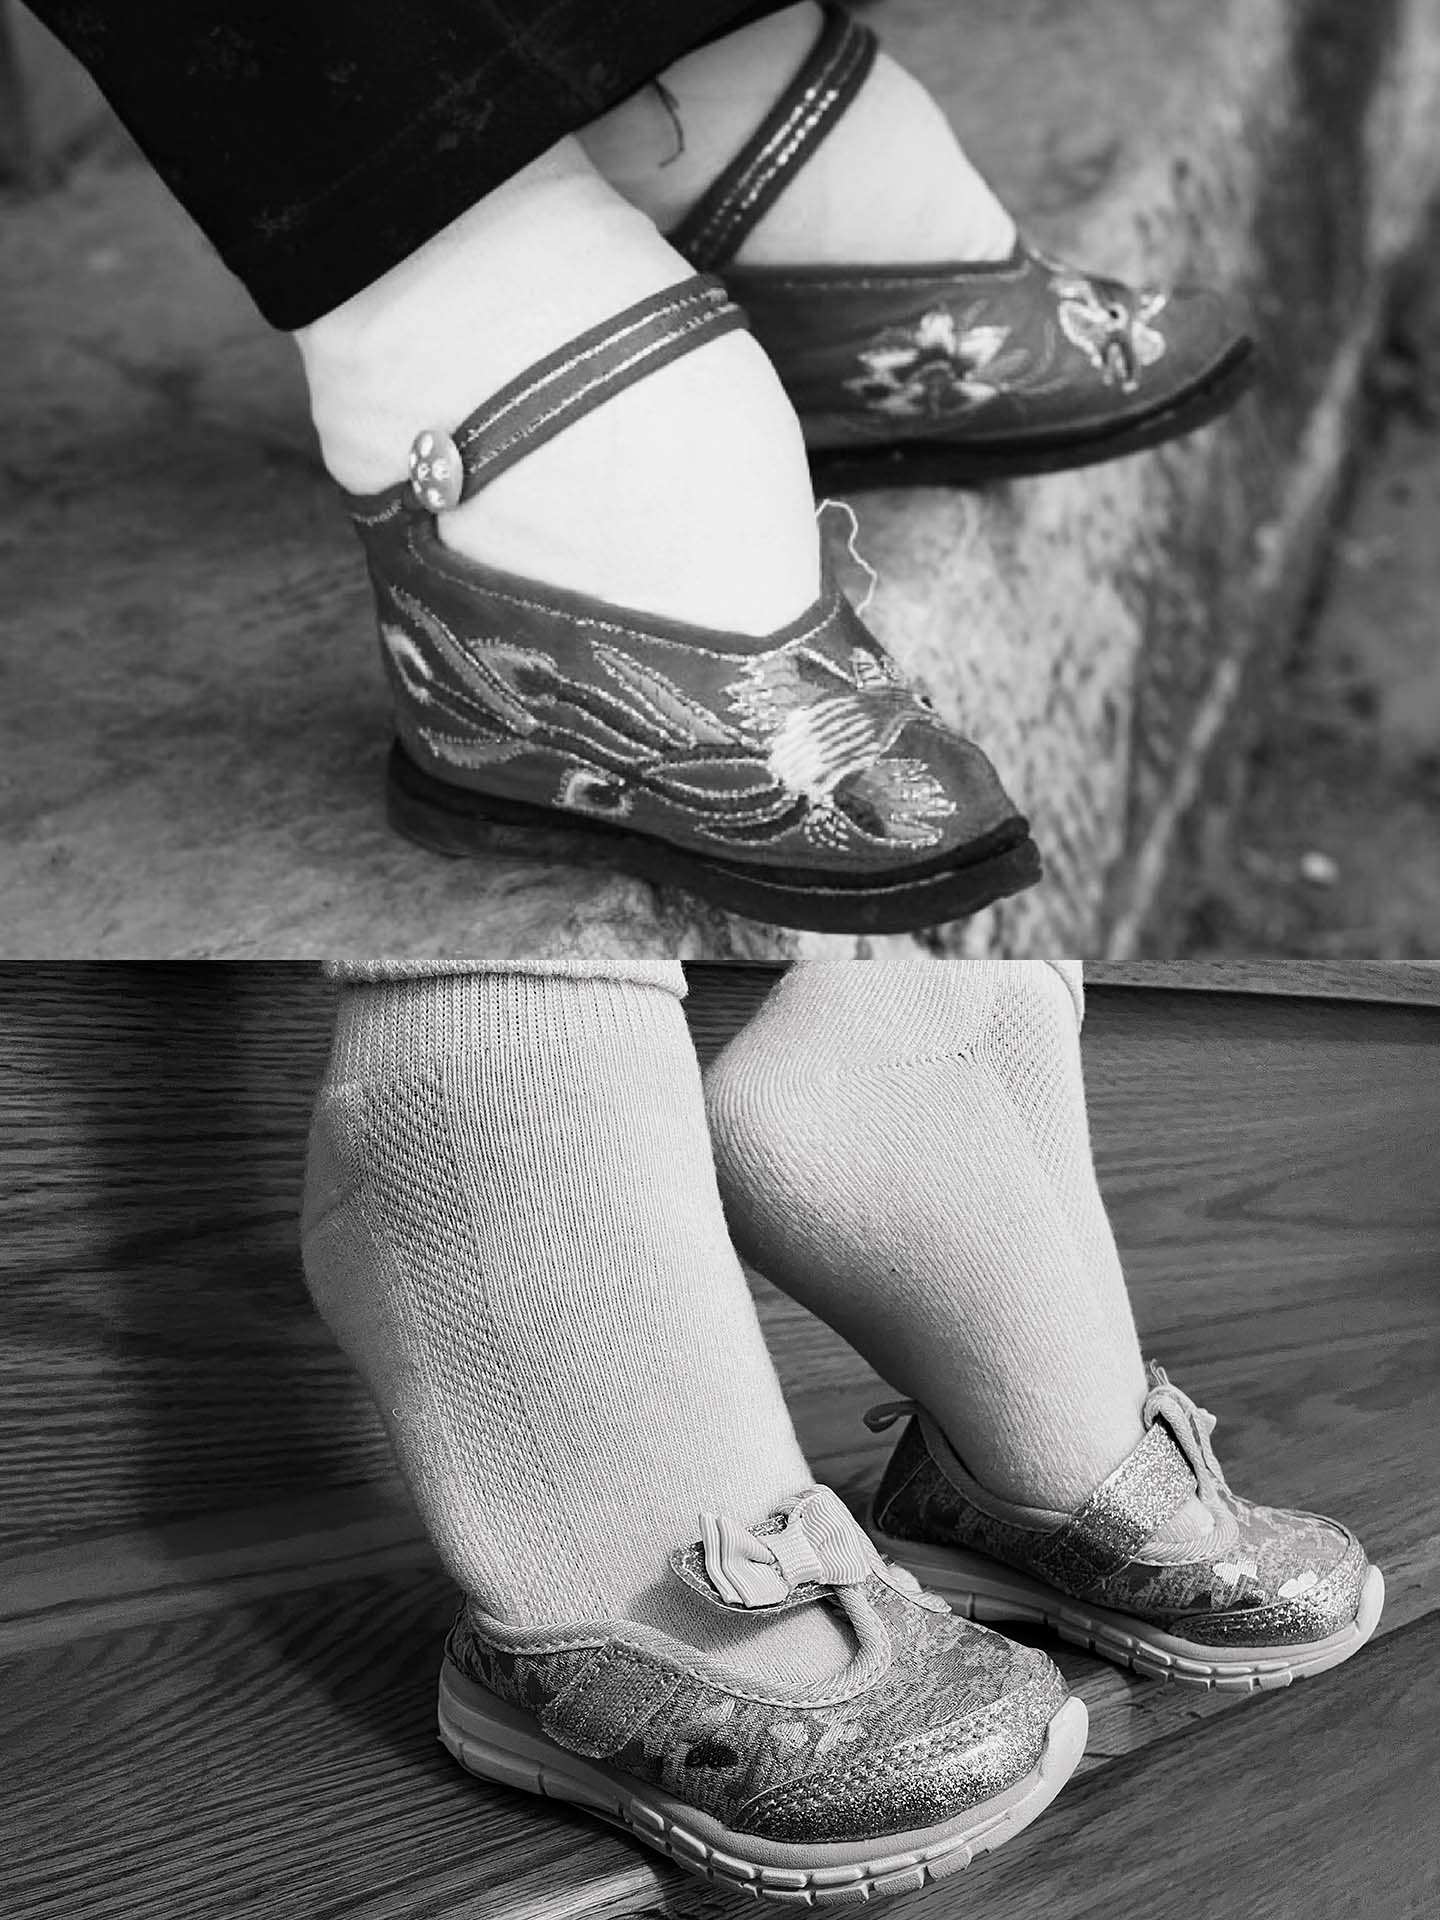 On the top of the image is a Chinese woman wearing her shoes in size 10 cm. On the bottom is me wearing a children’s shoe in size 11-12 cm.